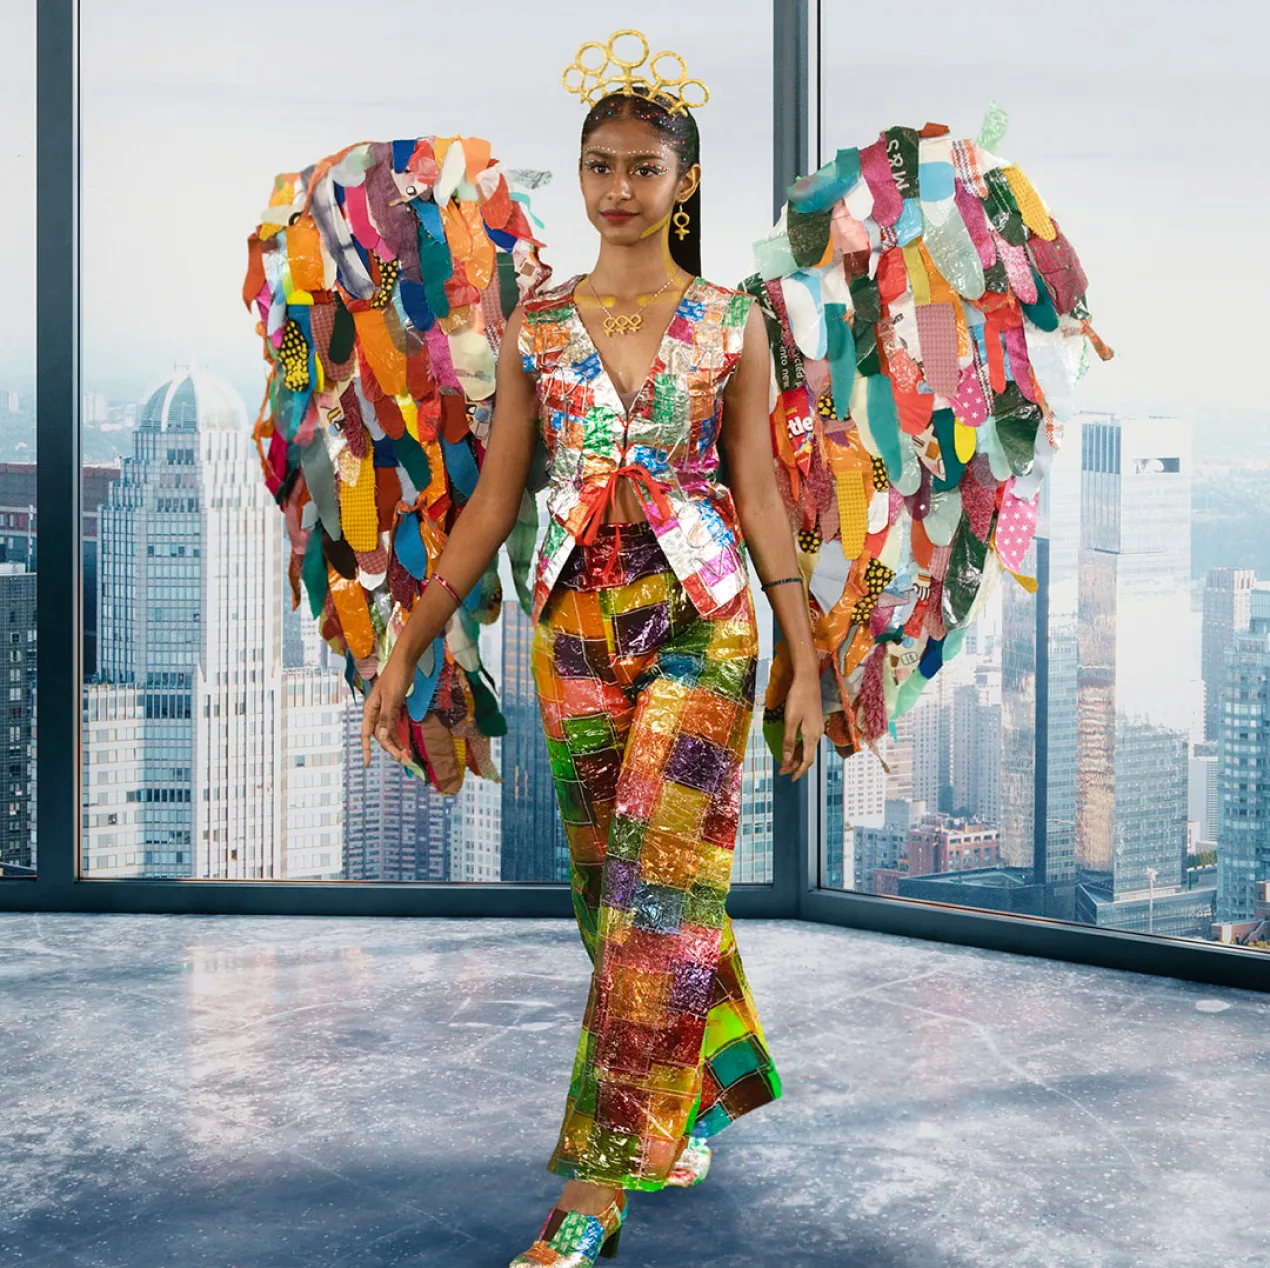 Junk Kouture participant Dominica Kodeeswaran models their garment “Soaring High” for United Nations Sustainable Development Goal Gender Equality